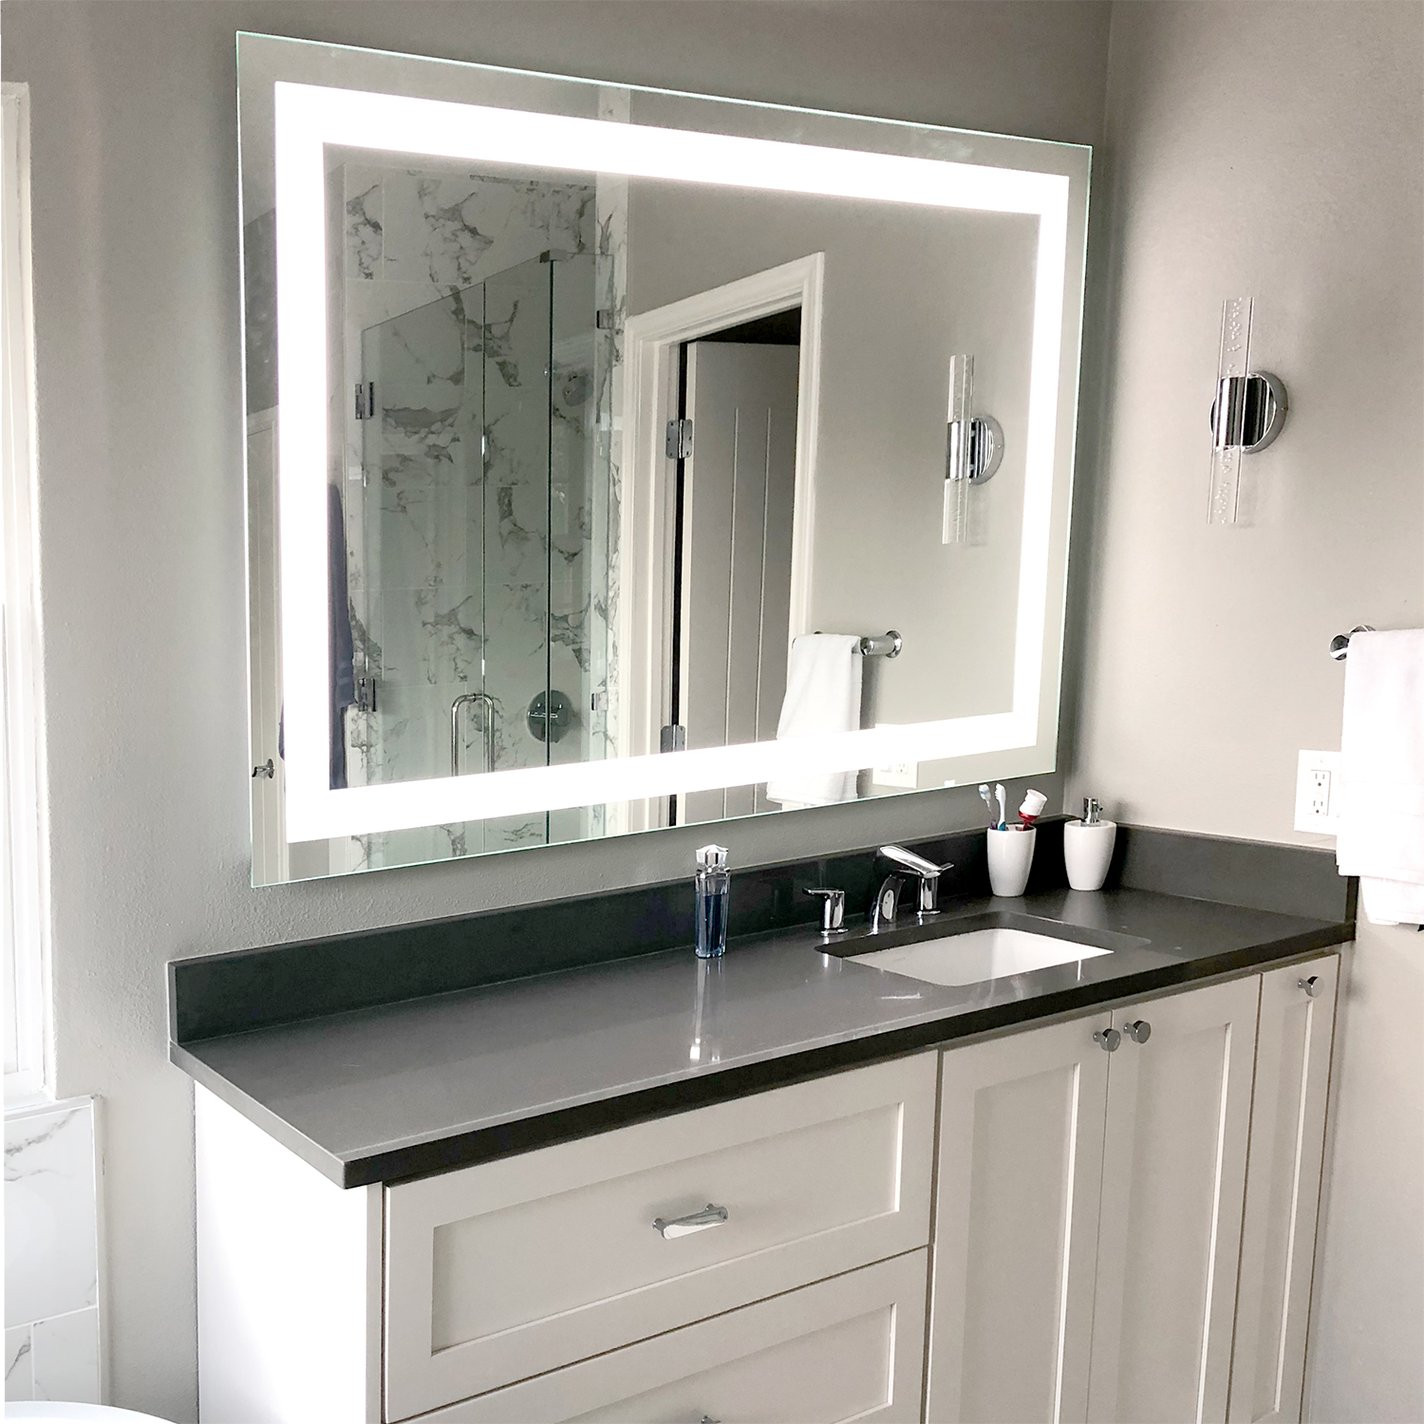 Lighted Mirrors For Bathroom
 Front Lighted LED Bathroom Vanity Mirror 60" x 40